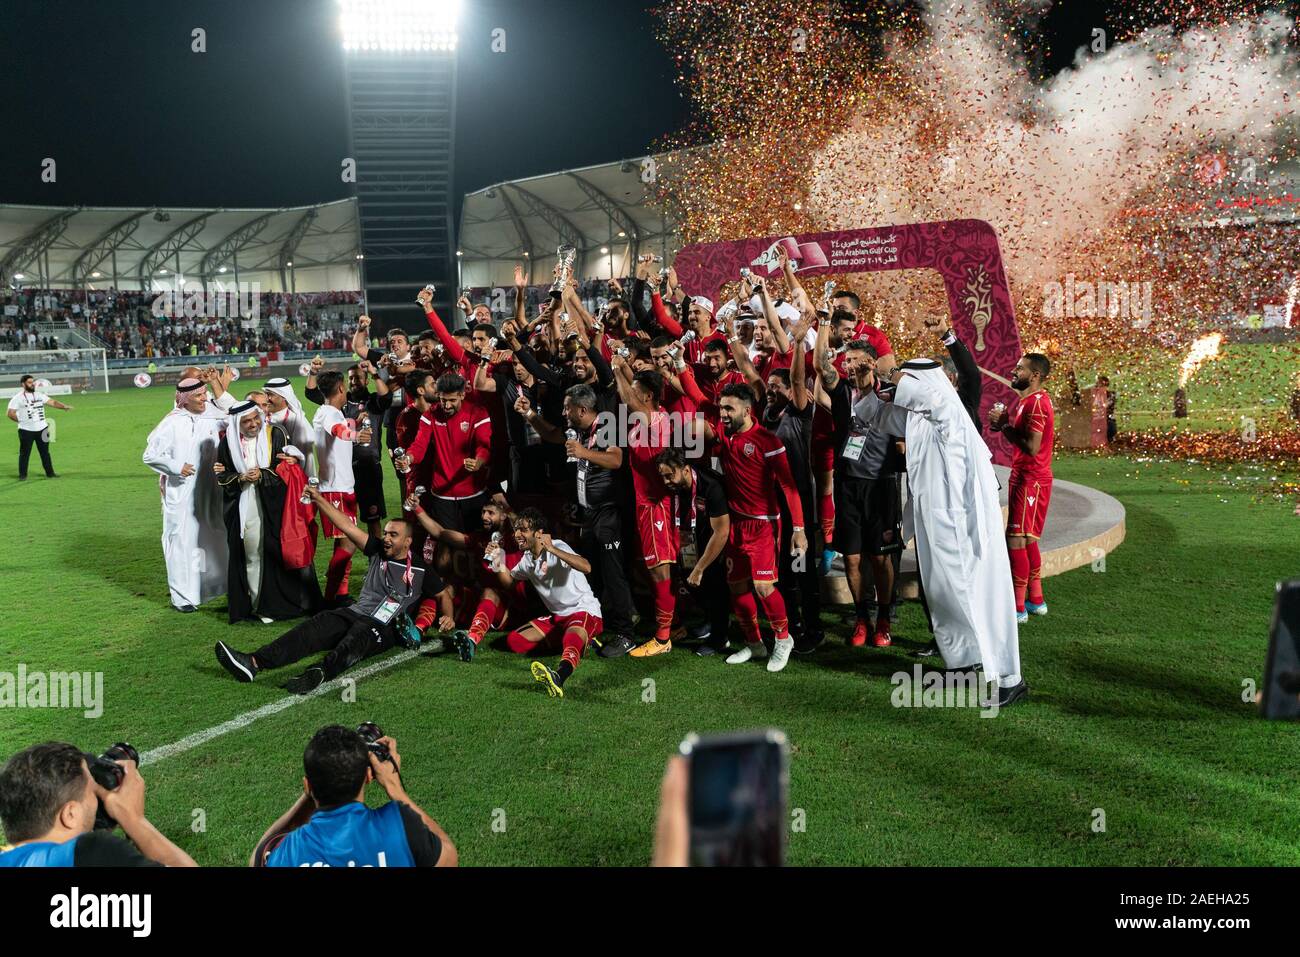 Bahrain National Football team players celebrating their win in the Gulf Cup final. Bahrain won the Arabian Gulf Cup title for the first time with a 1-0 victory over Saudi Arabia in the final on Sunday. Bahrain last reached the final in 2004.  The Saudis were looking to lift the title for the fourth time. During the competition's group stage, Bahrain had lost 0-2 to Saudi Arabia. Stock Photo